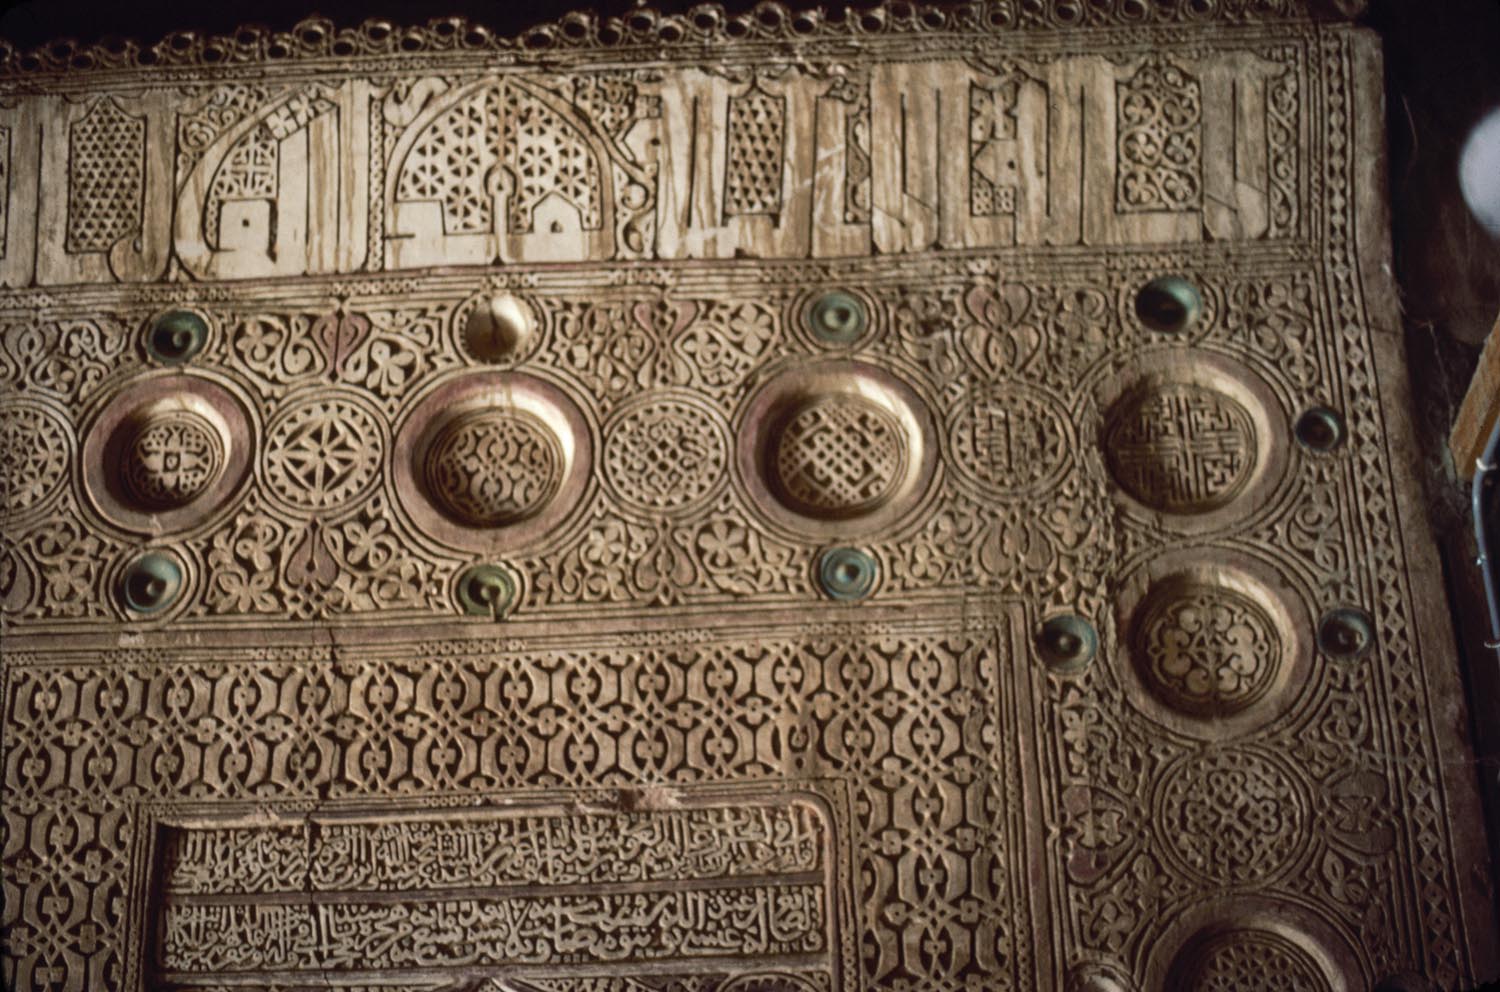 Detail of mihrab showing carved stucco work and inscription.